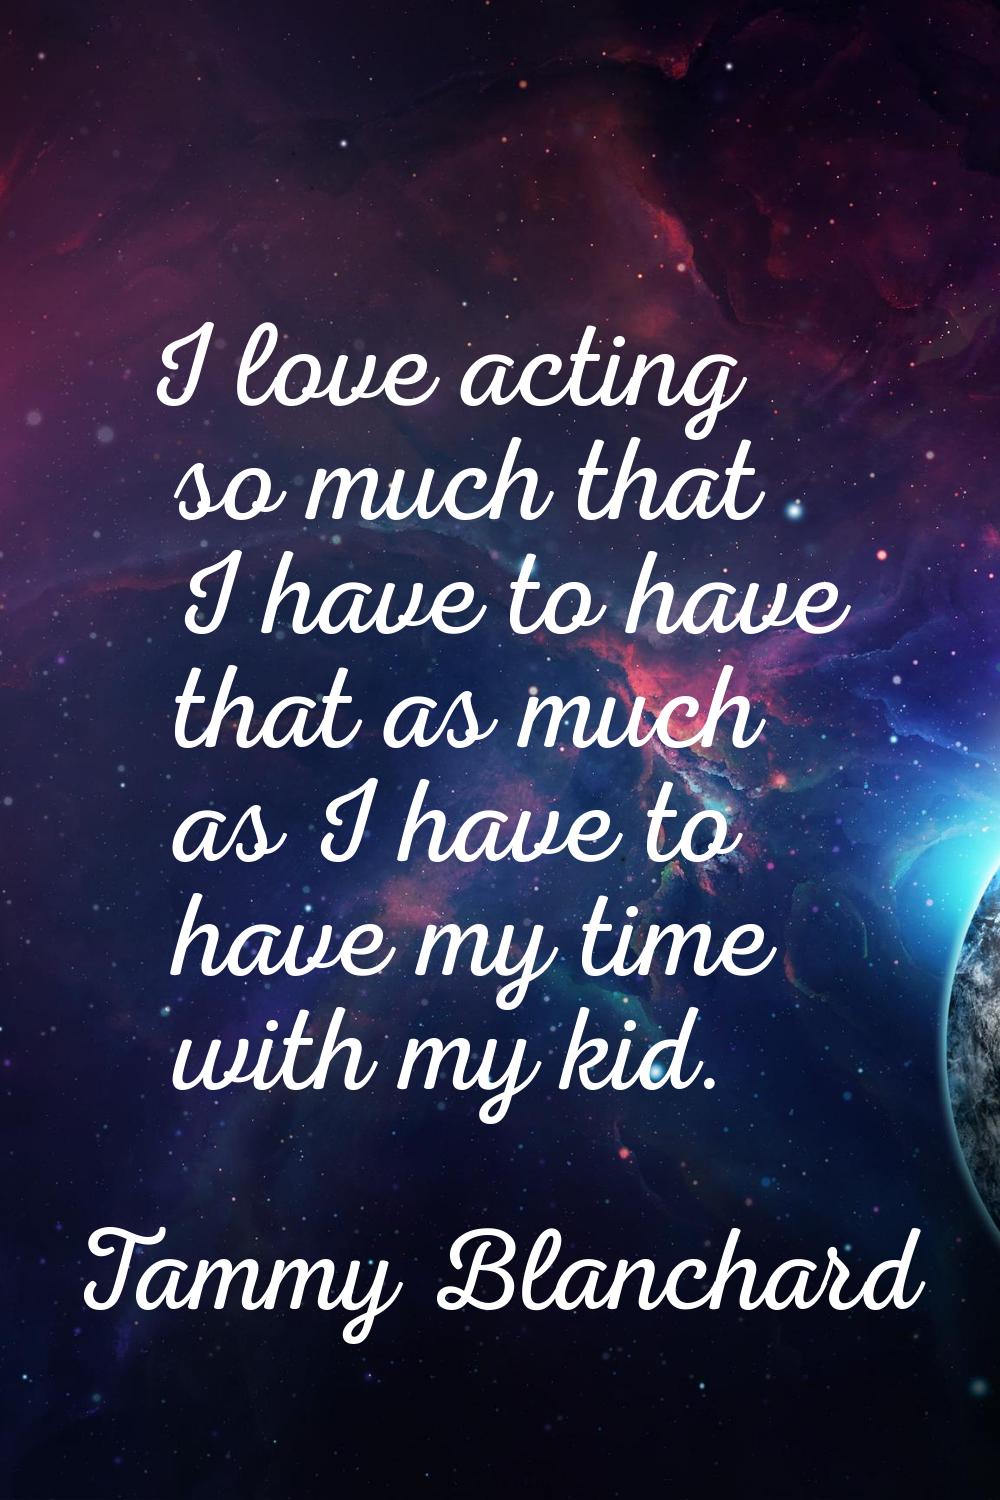 I love acting so much that I have to have that as much as I have to have my time with my kid.